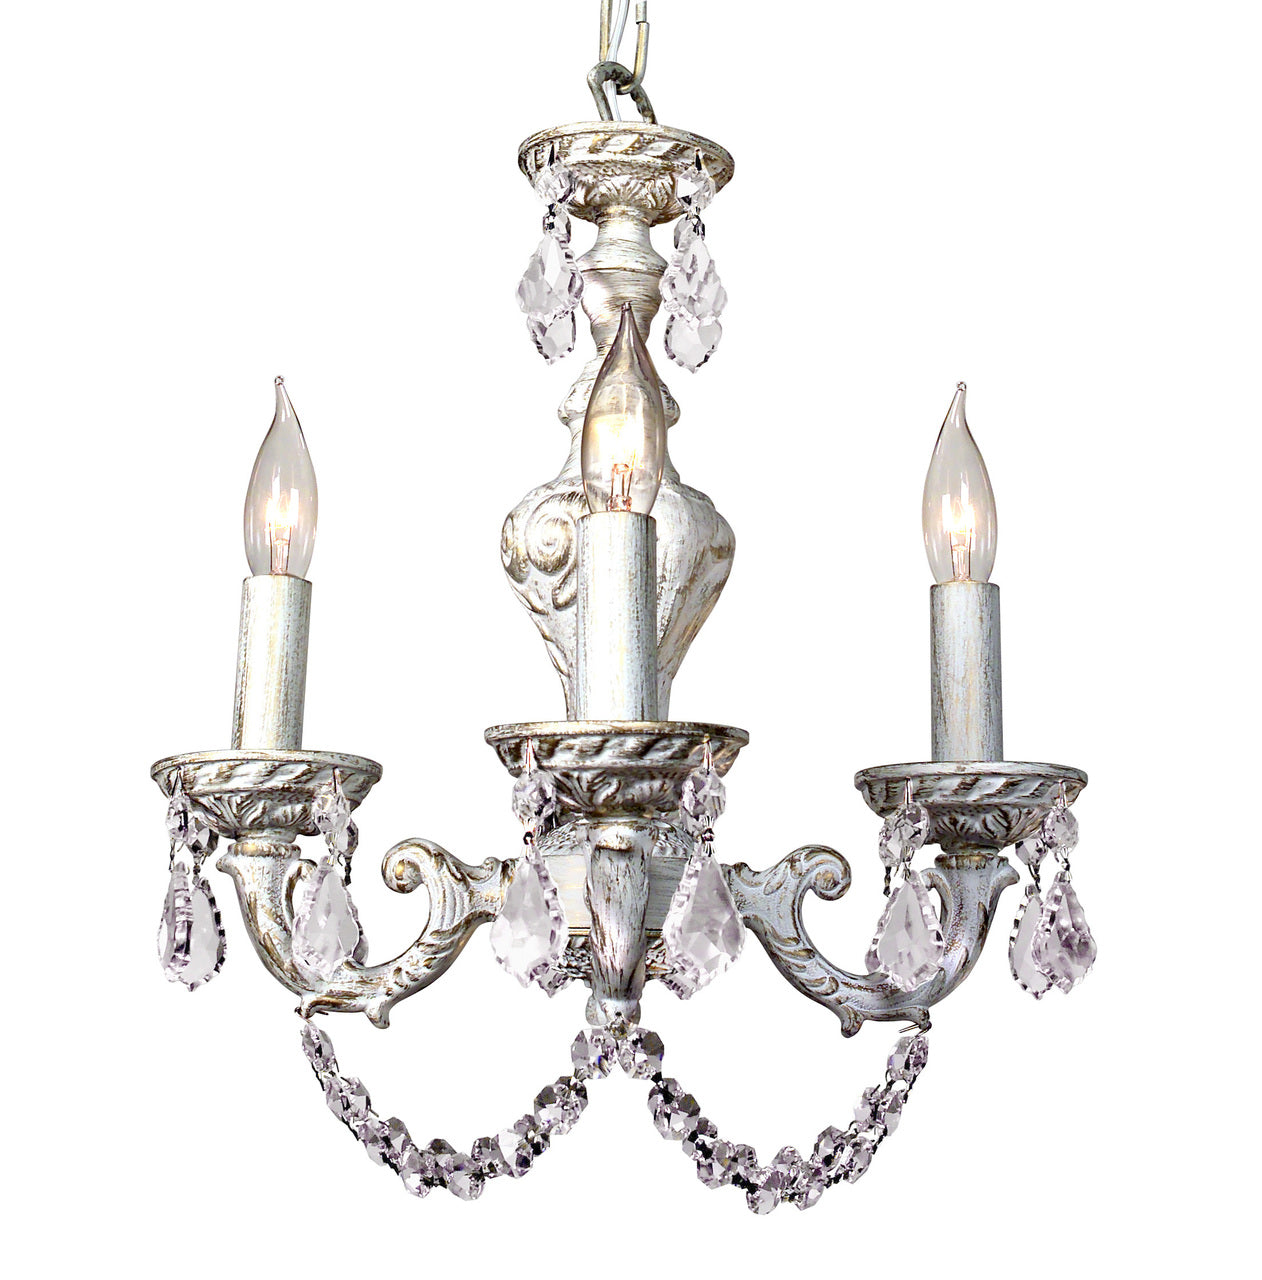 Classic Lighting 8335 AW CP Gabrielle Crystal Mini Chandelier in Antique White